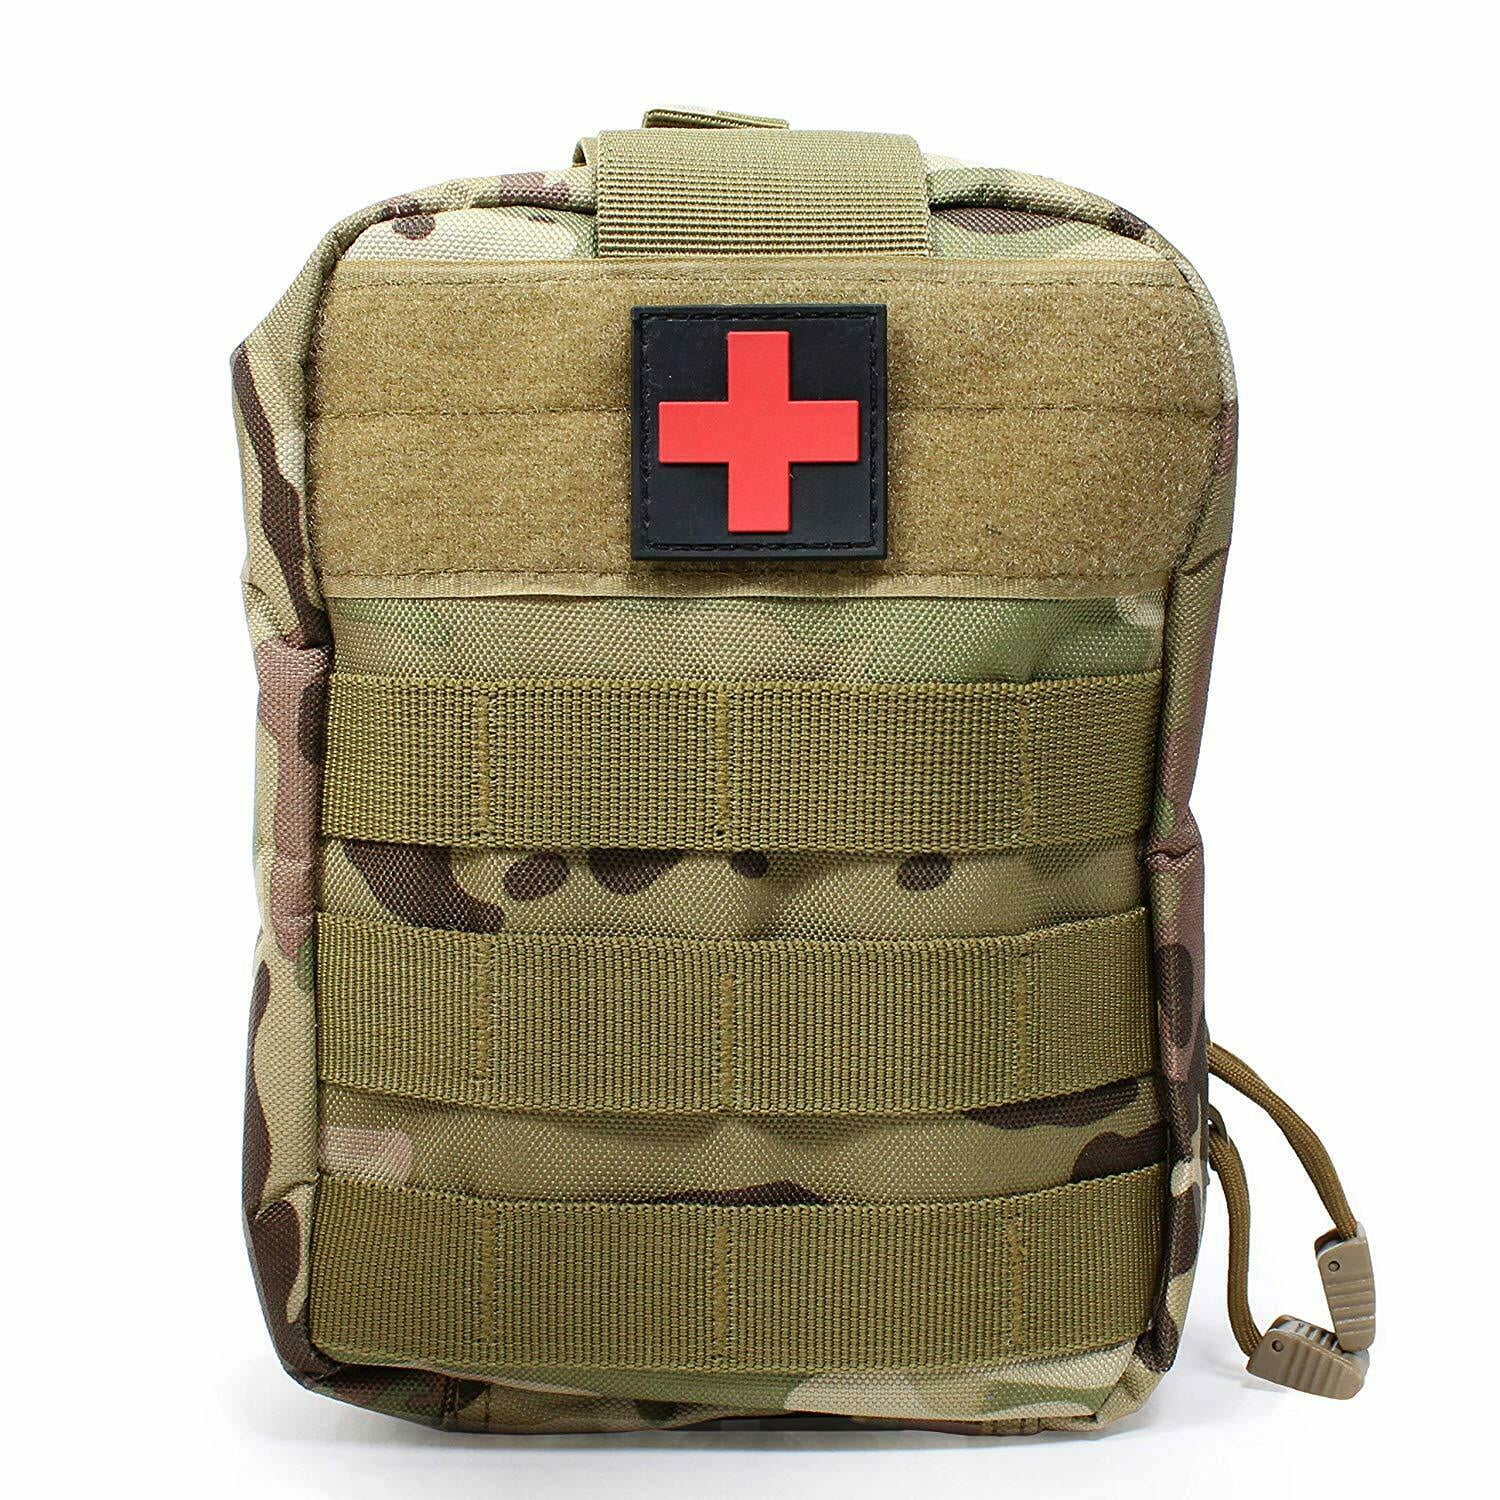 Outdoor Tactics Survival Molle Pouch First Aid Kit Emergency Medical Utility Bag 